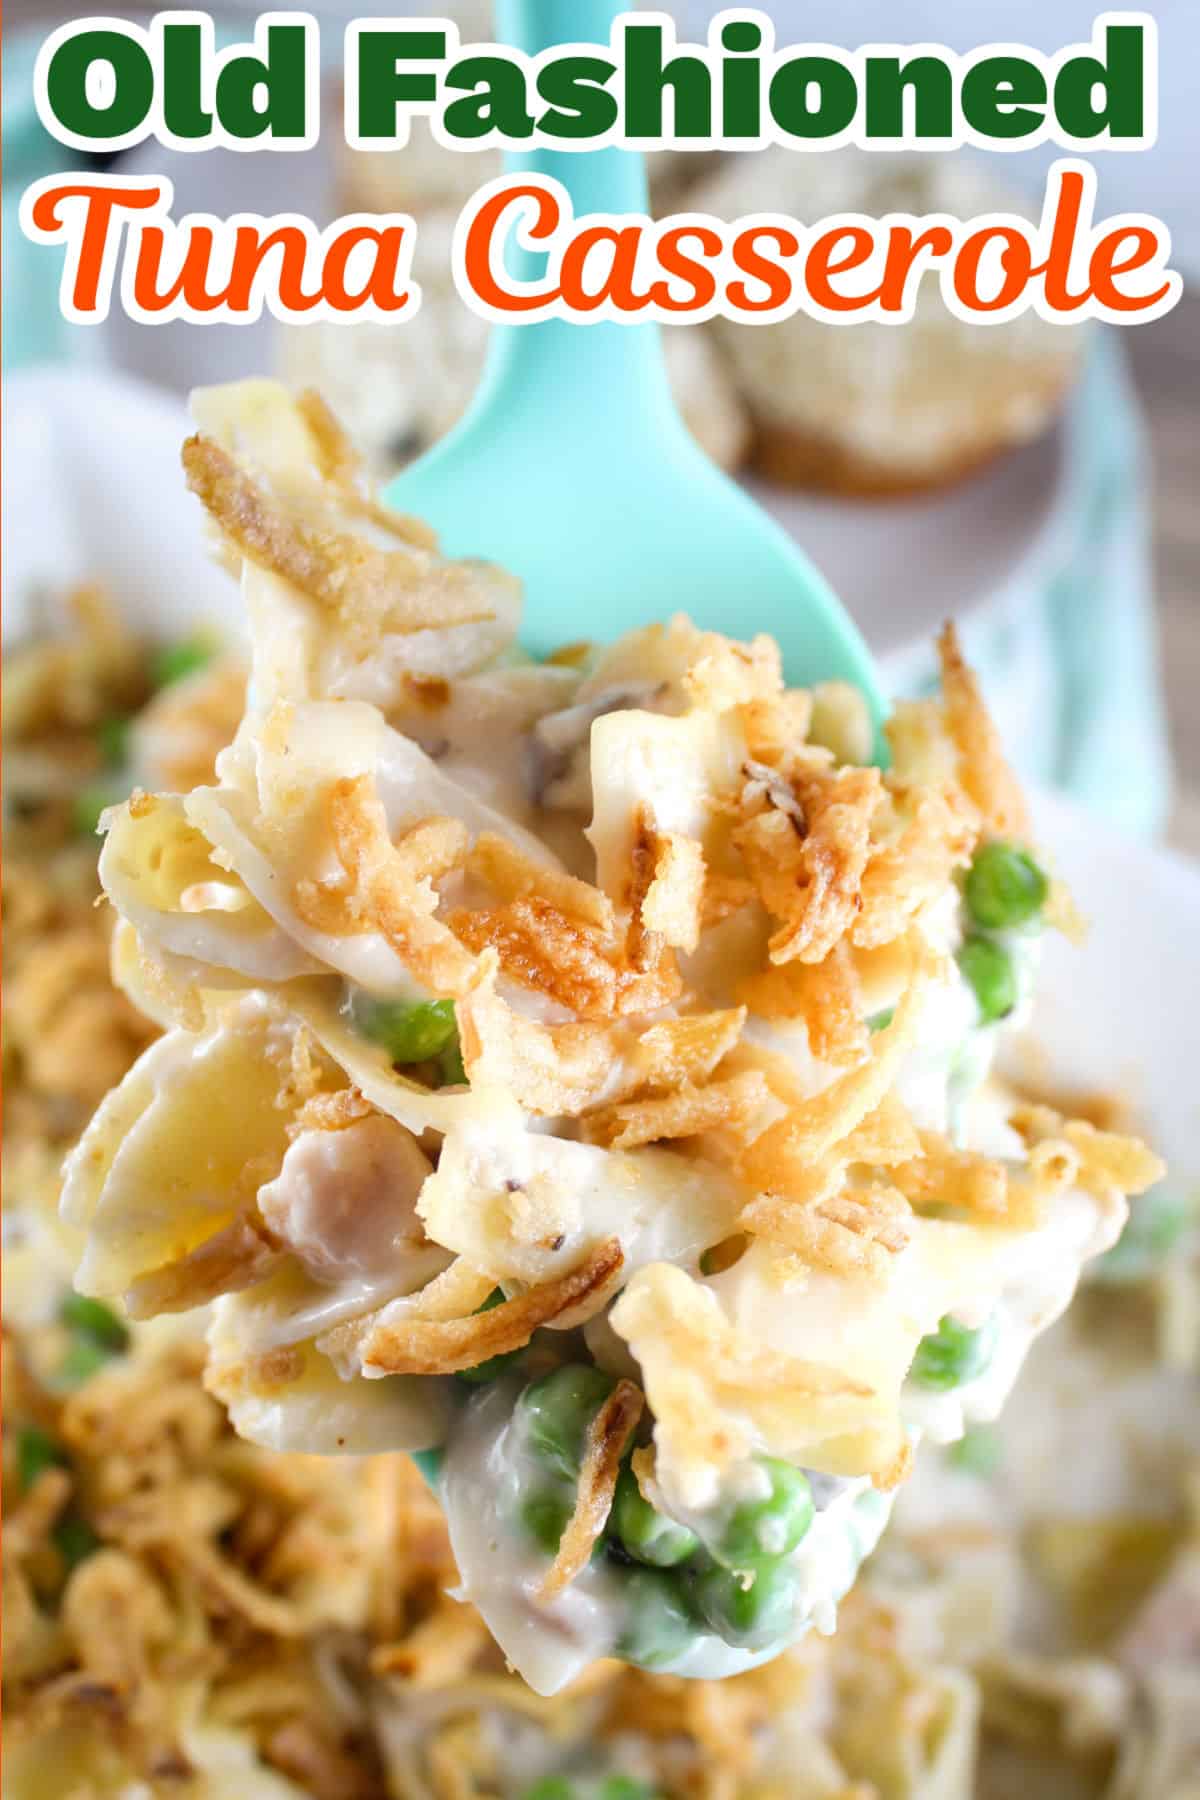 Old Fashioned Tuna Noodle Casserole is definitely a throwback weeknight dinner. It's a comfort food classic for me for sure! Egg noodles, cream soup and tuna are the main ingredients to a quick dinner on the table in 30 minutes! via @foodhussy